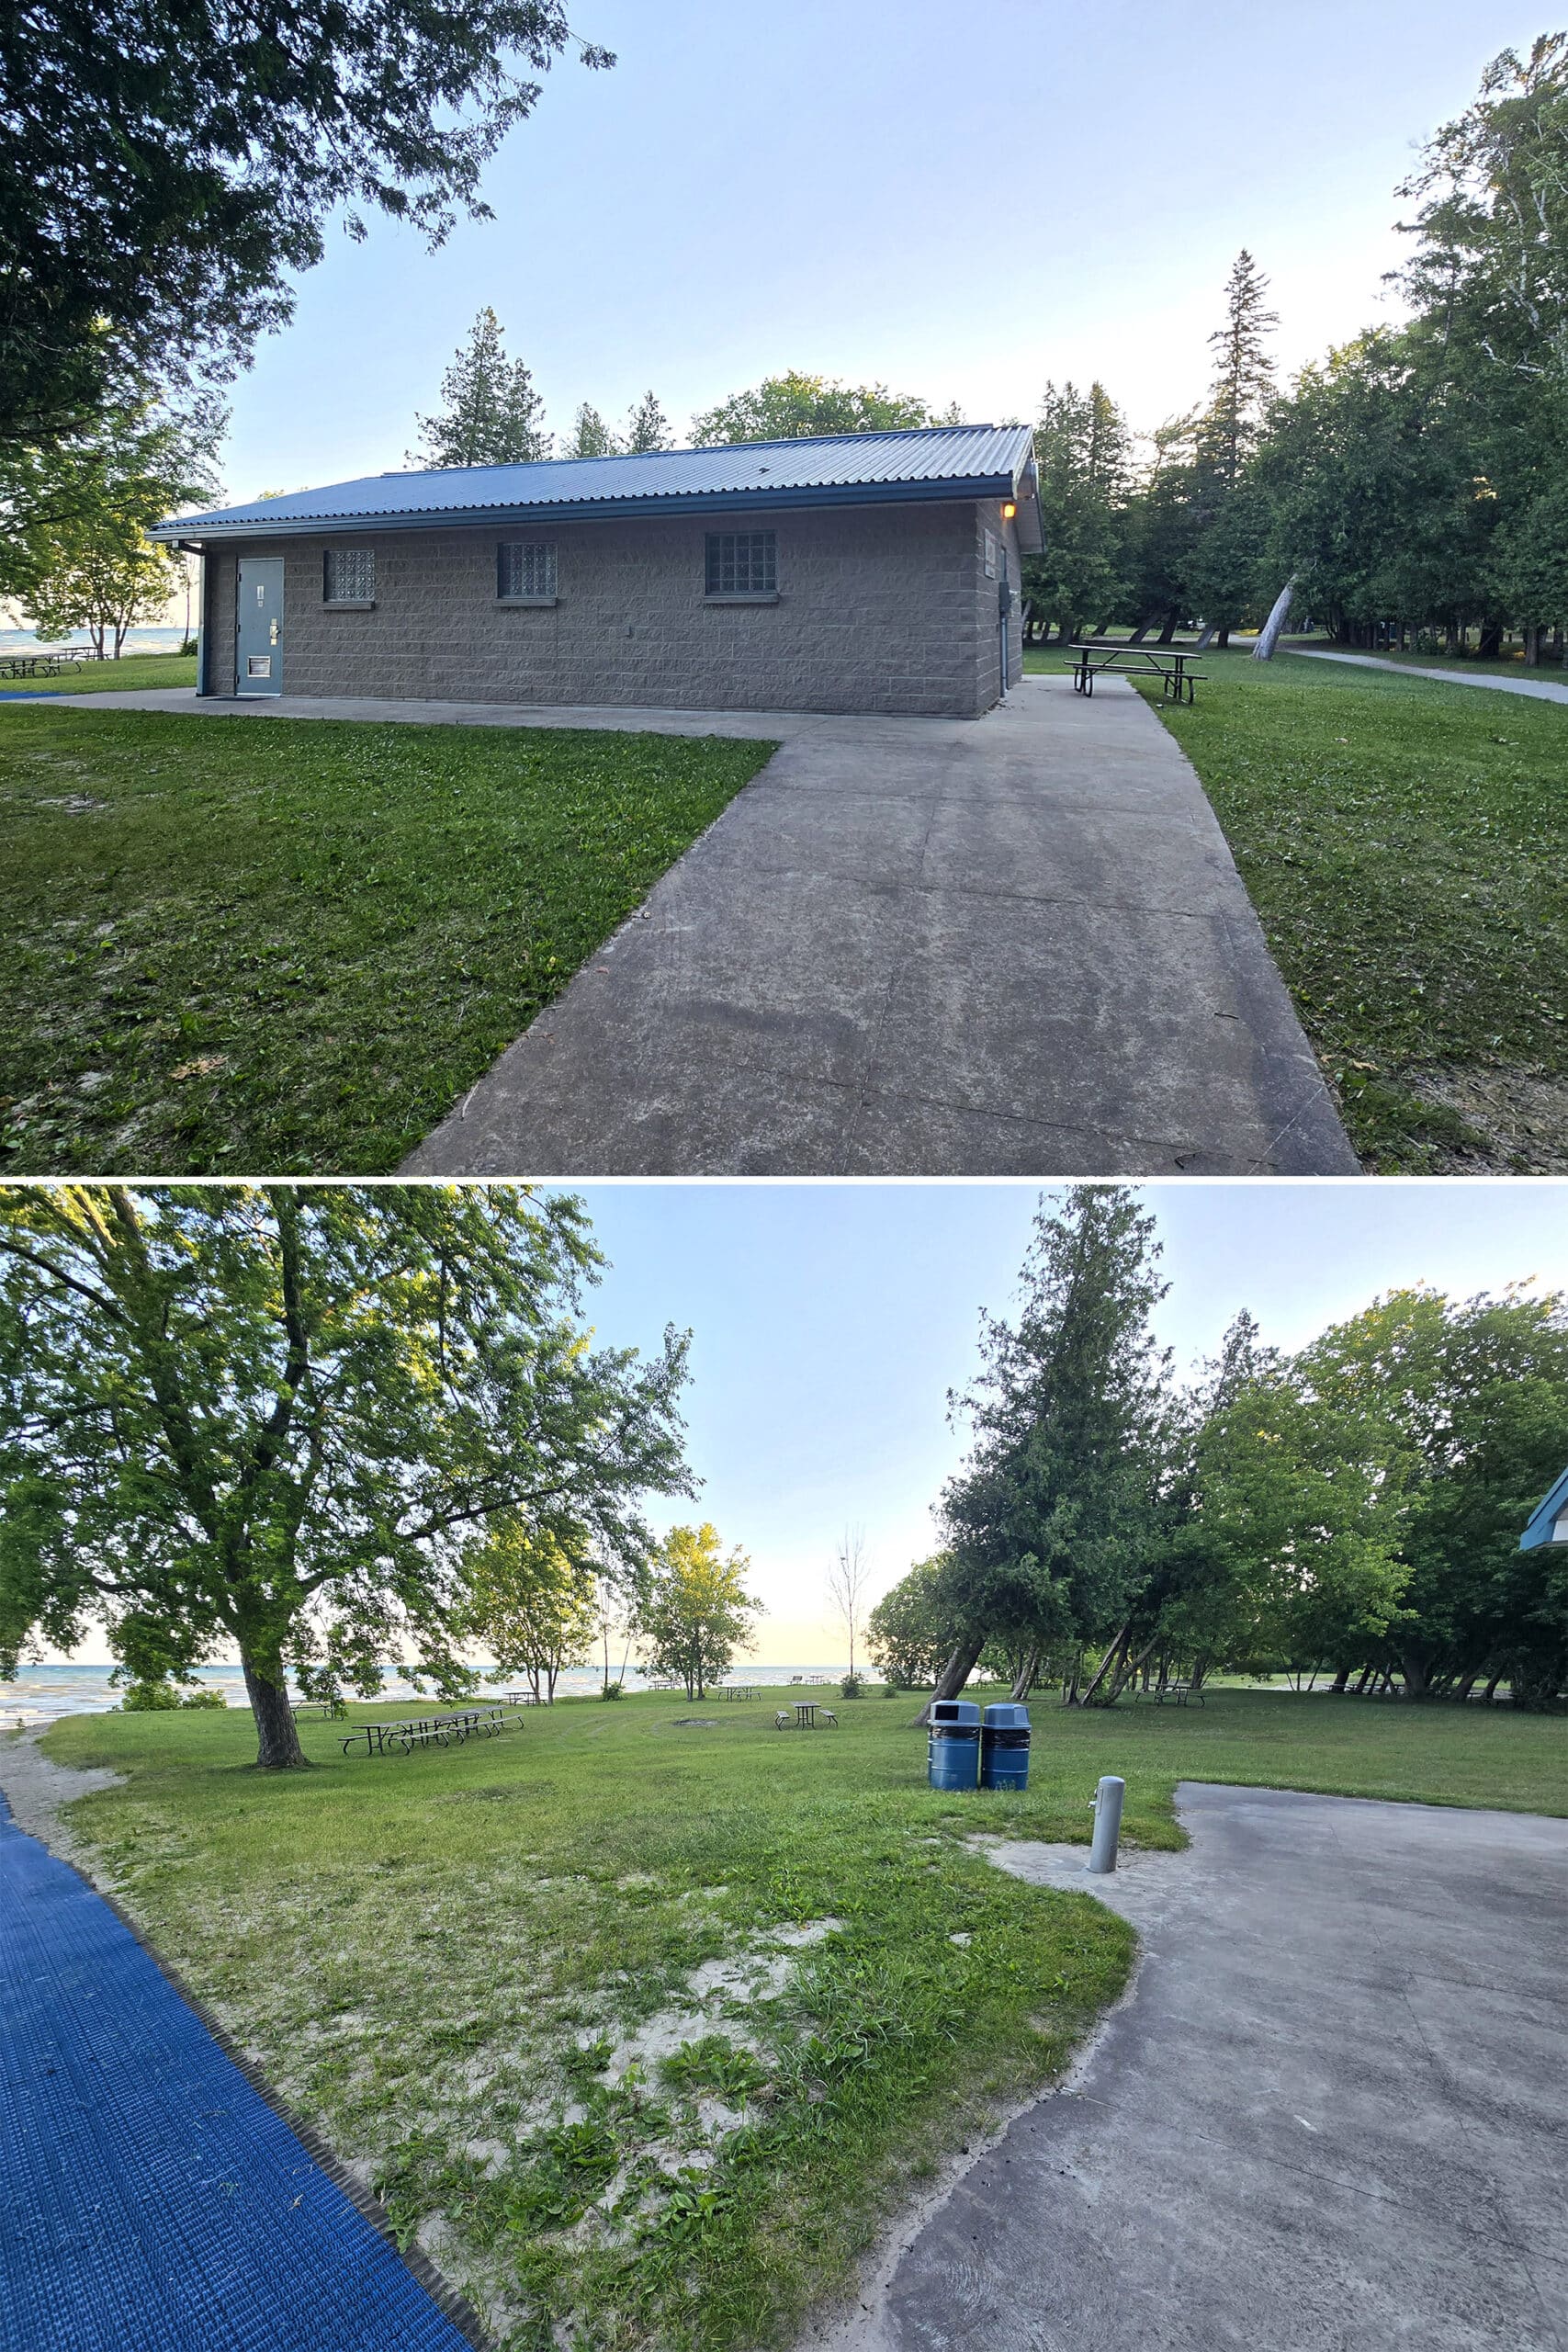 2 part image showing the beach area 5 comfort station and picnic area.